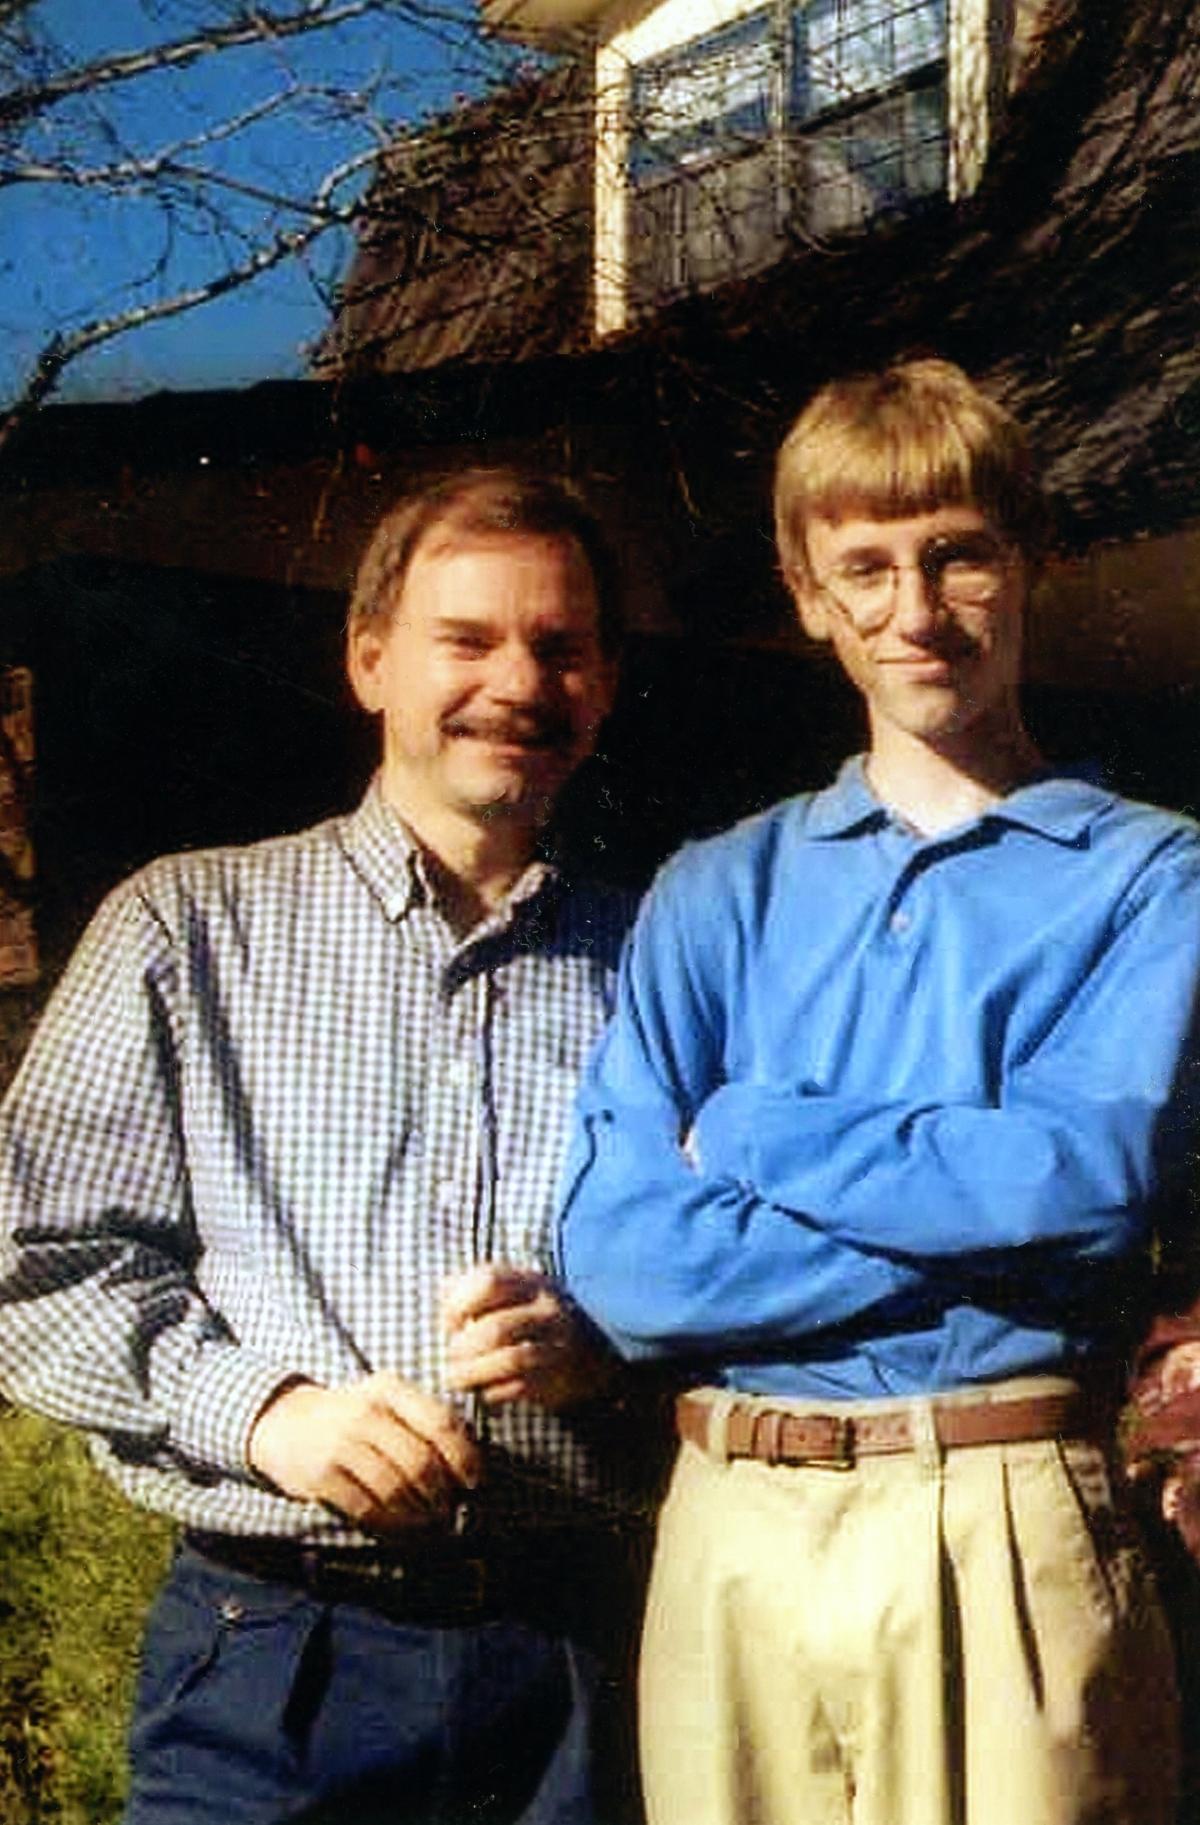 Tom Mauser and his son Dan before Dan was killed in the Columbine High School shooting in 1999. (Courtesy of Tom Mauser)